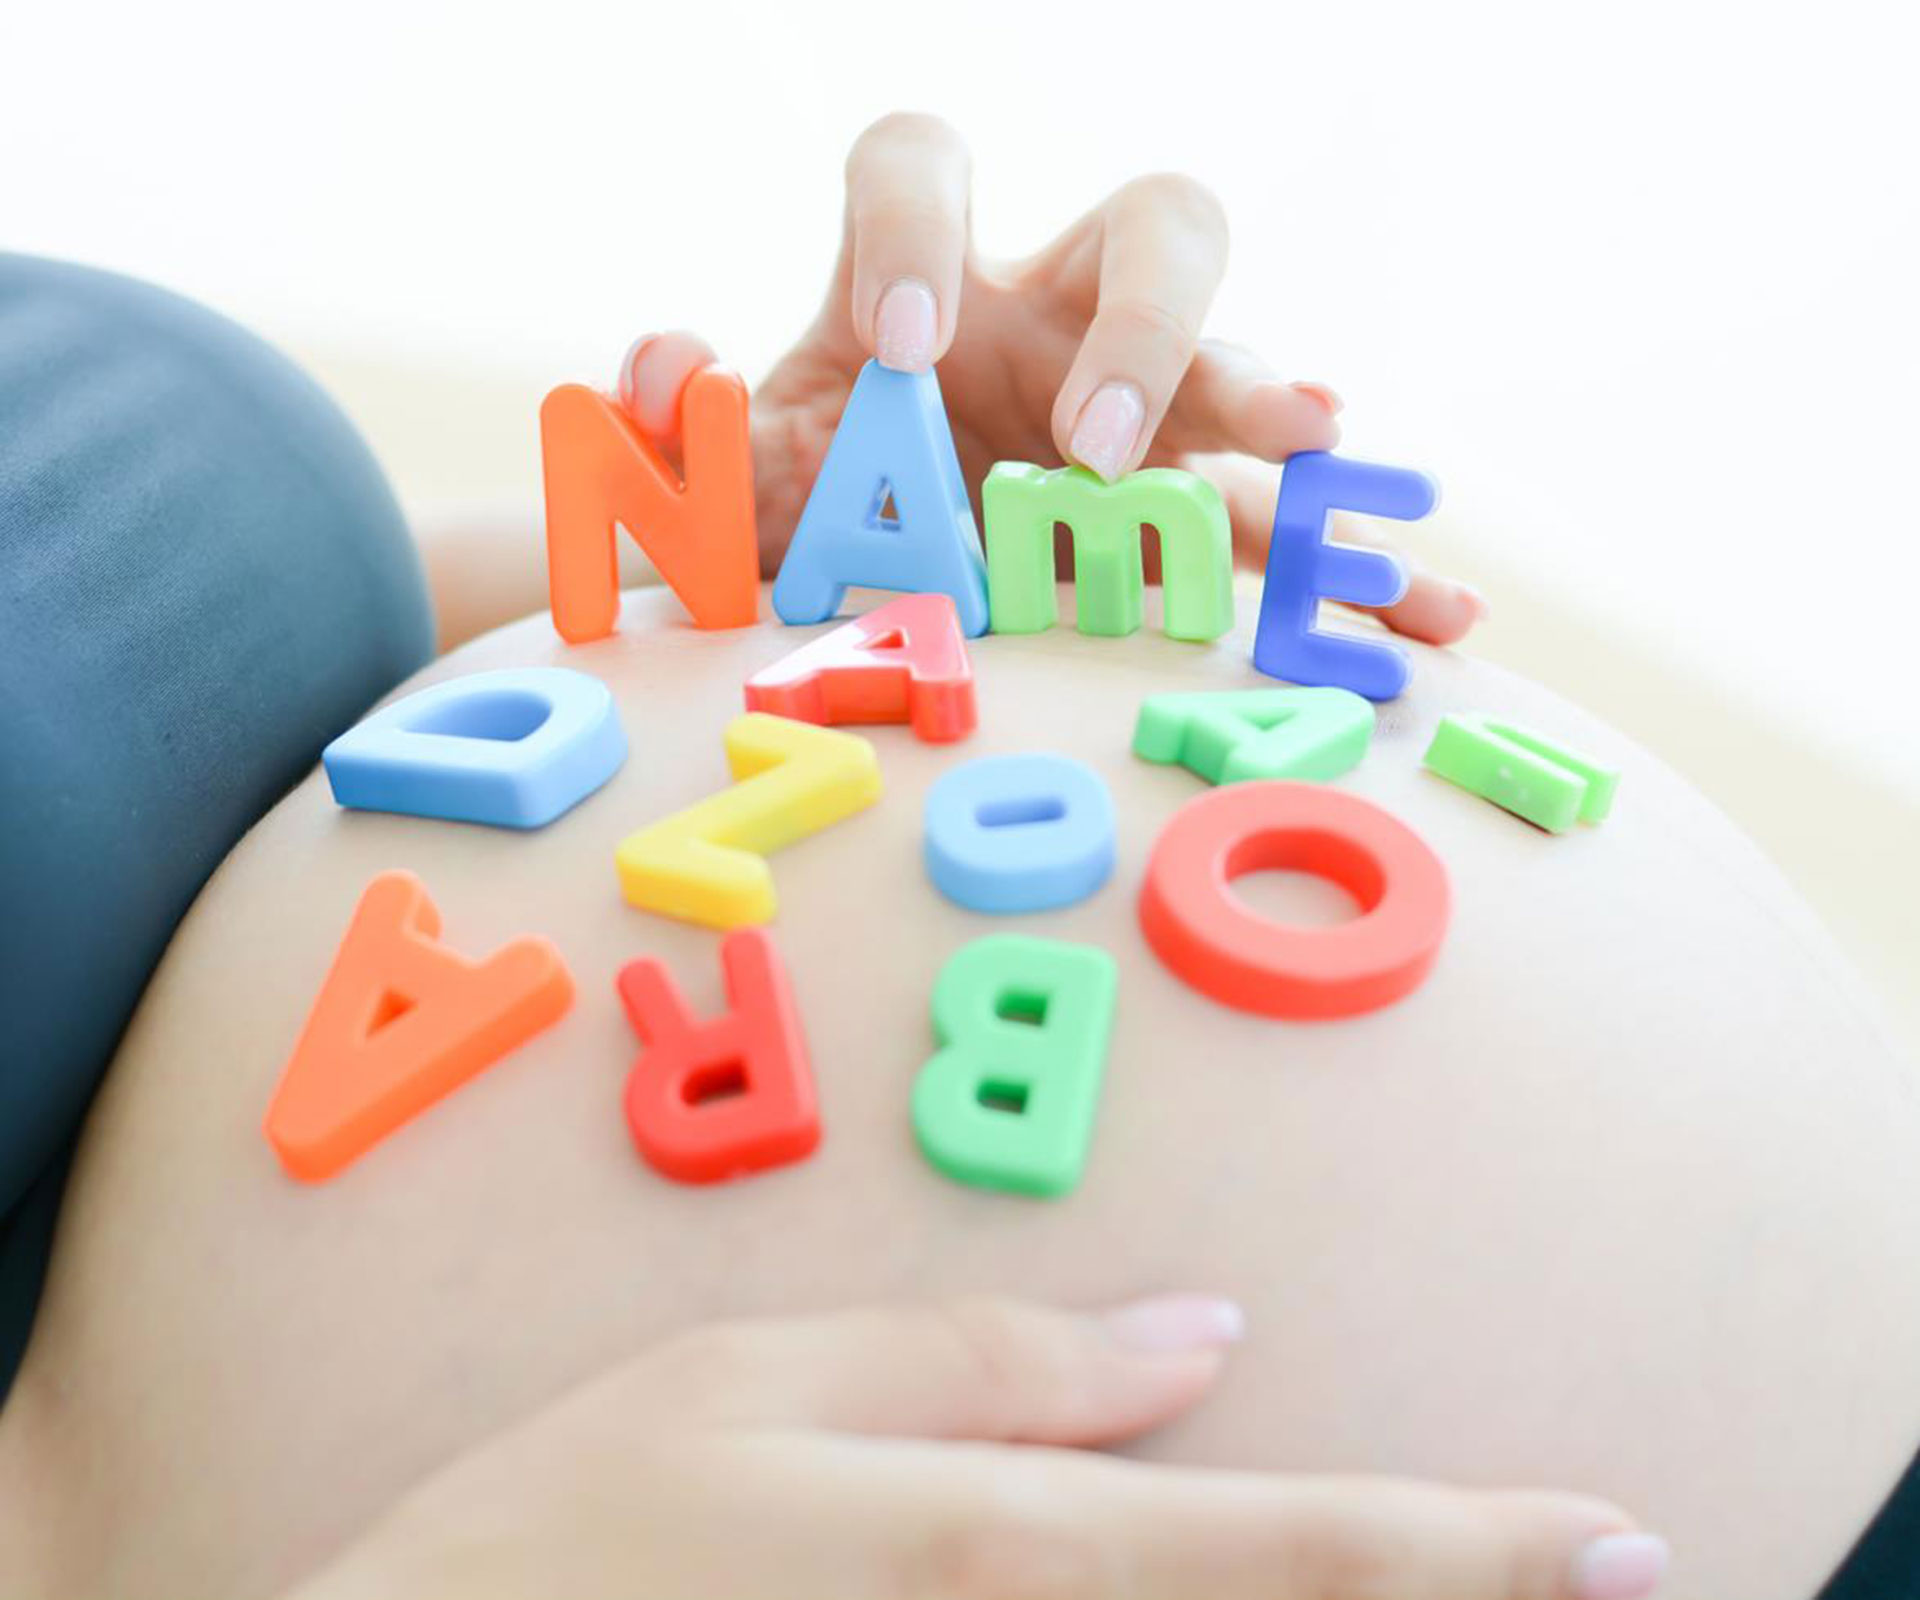 Baby-naming experts Name Berry’s top picks for 2017